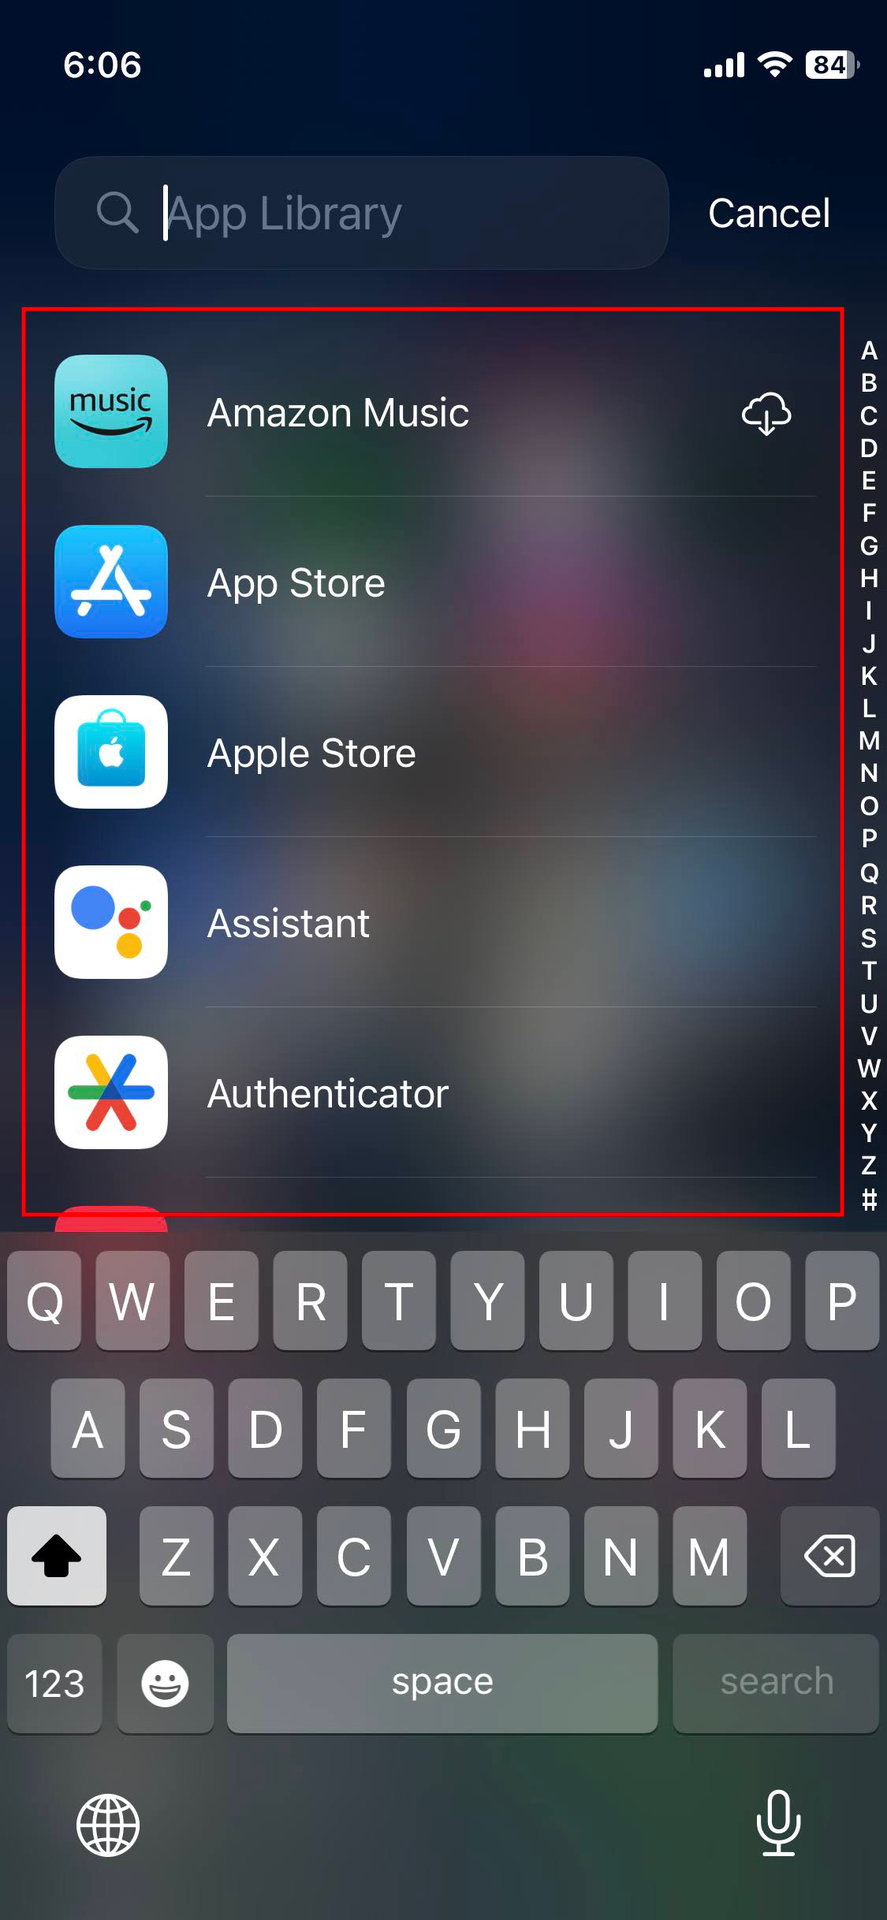 How to check your complete app list on iPhone (2)